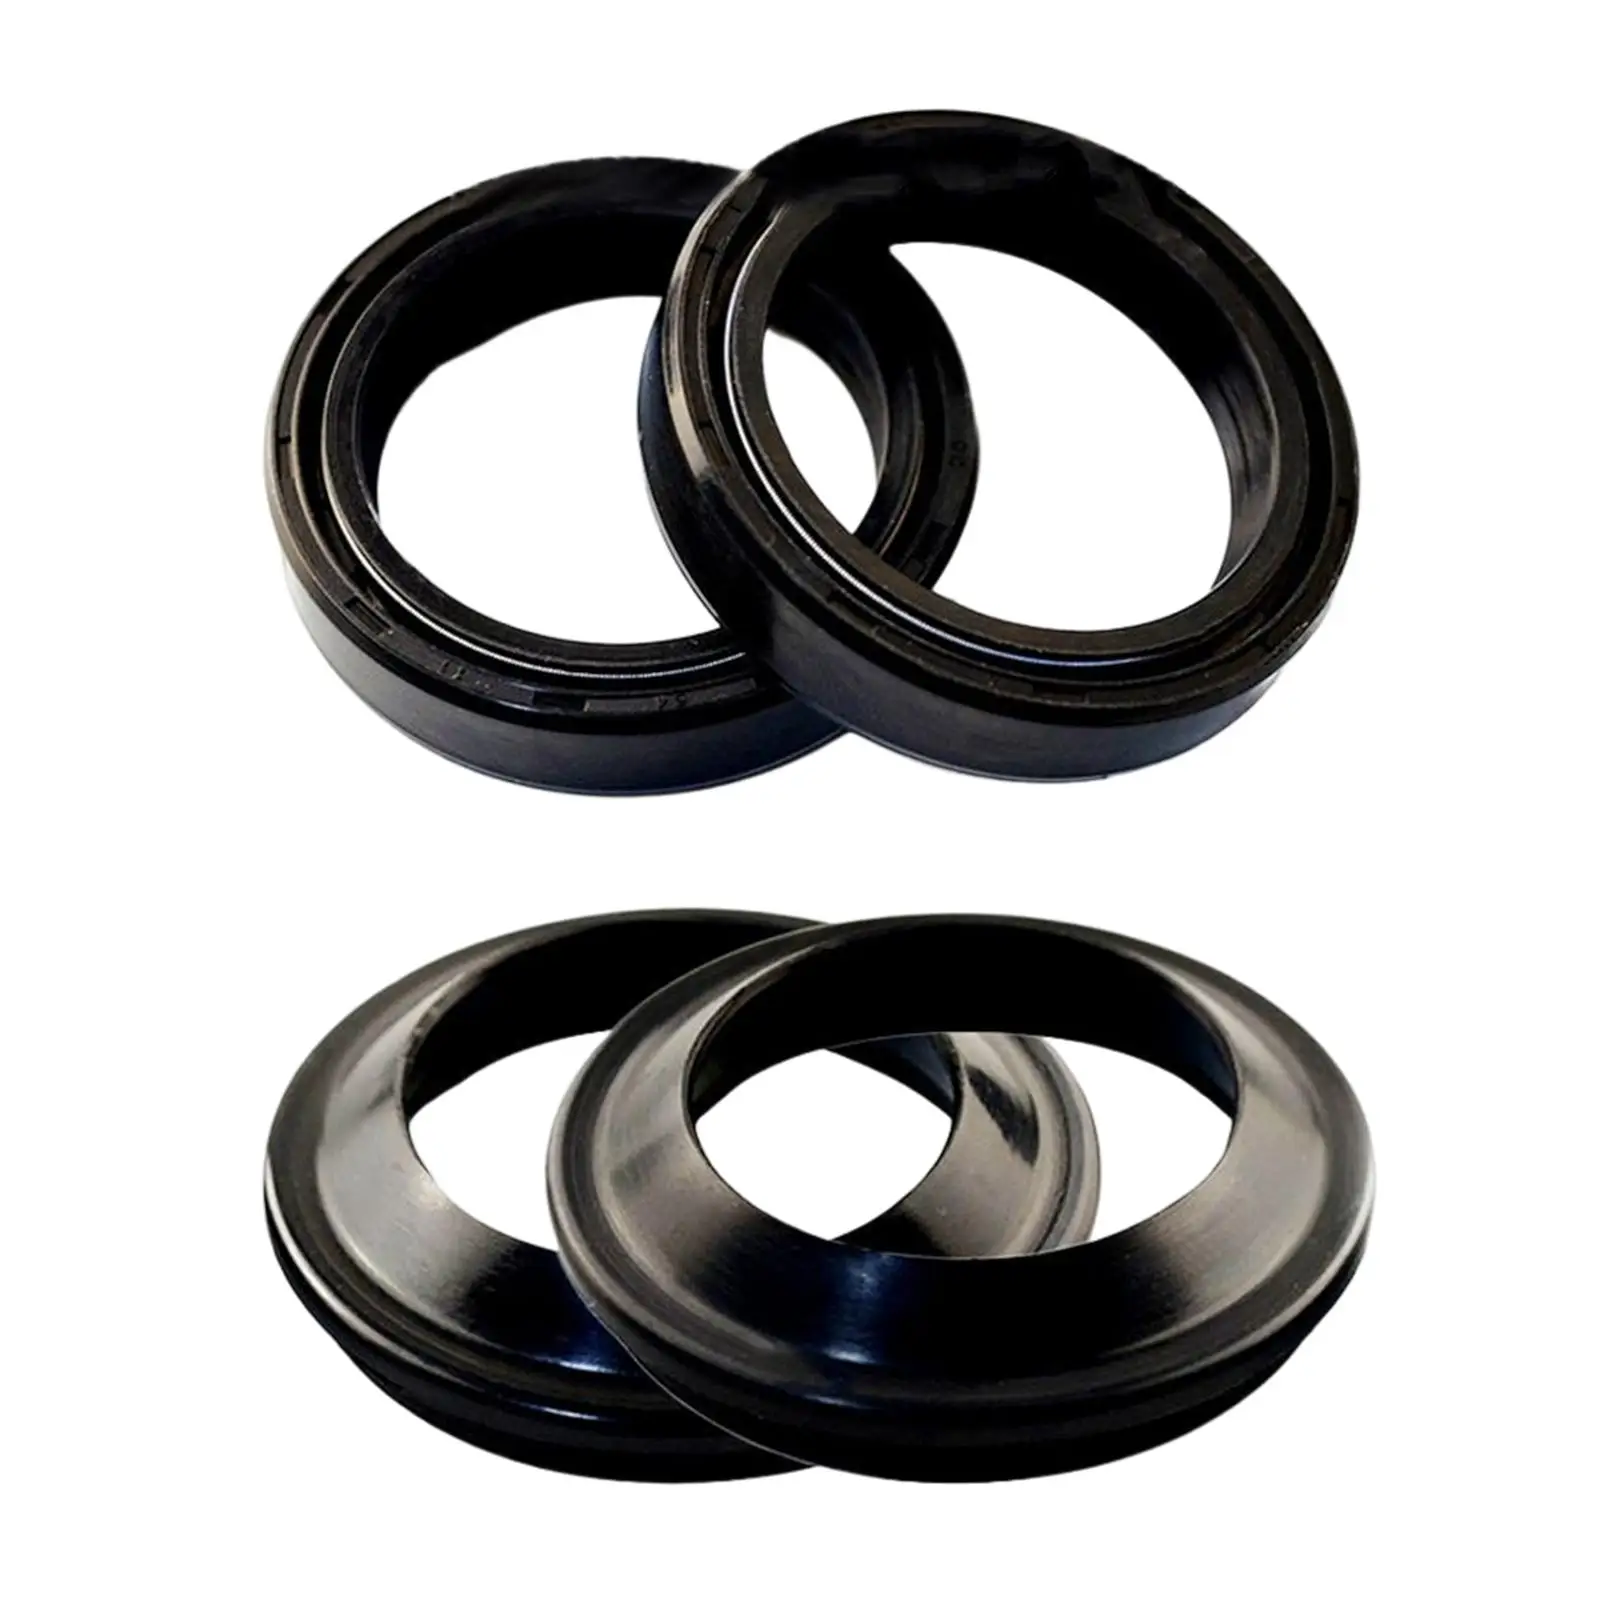 Motorcycle Fork Seal and Dust Seal Kit Rubber 48x61x11mm for Yamaha Fjr1300 Fjr1300A Xvs650 Fjr1300AE Replace Parts